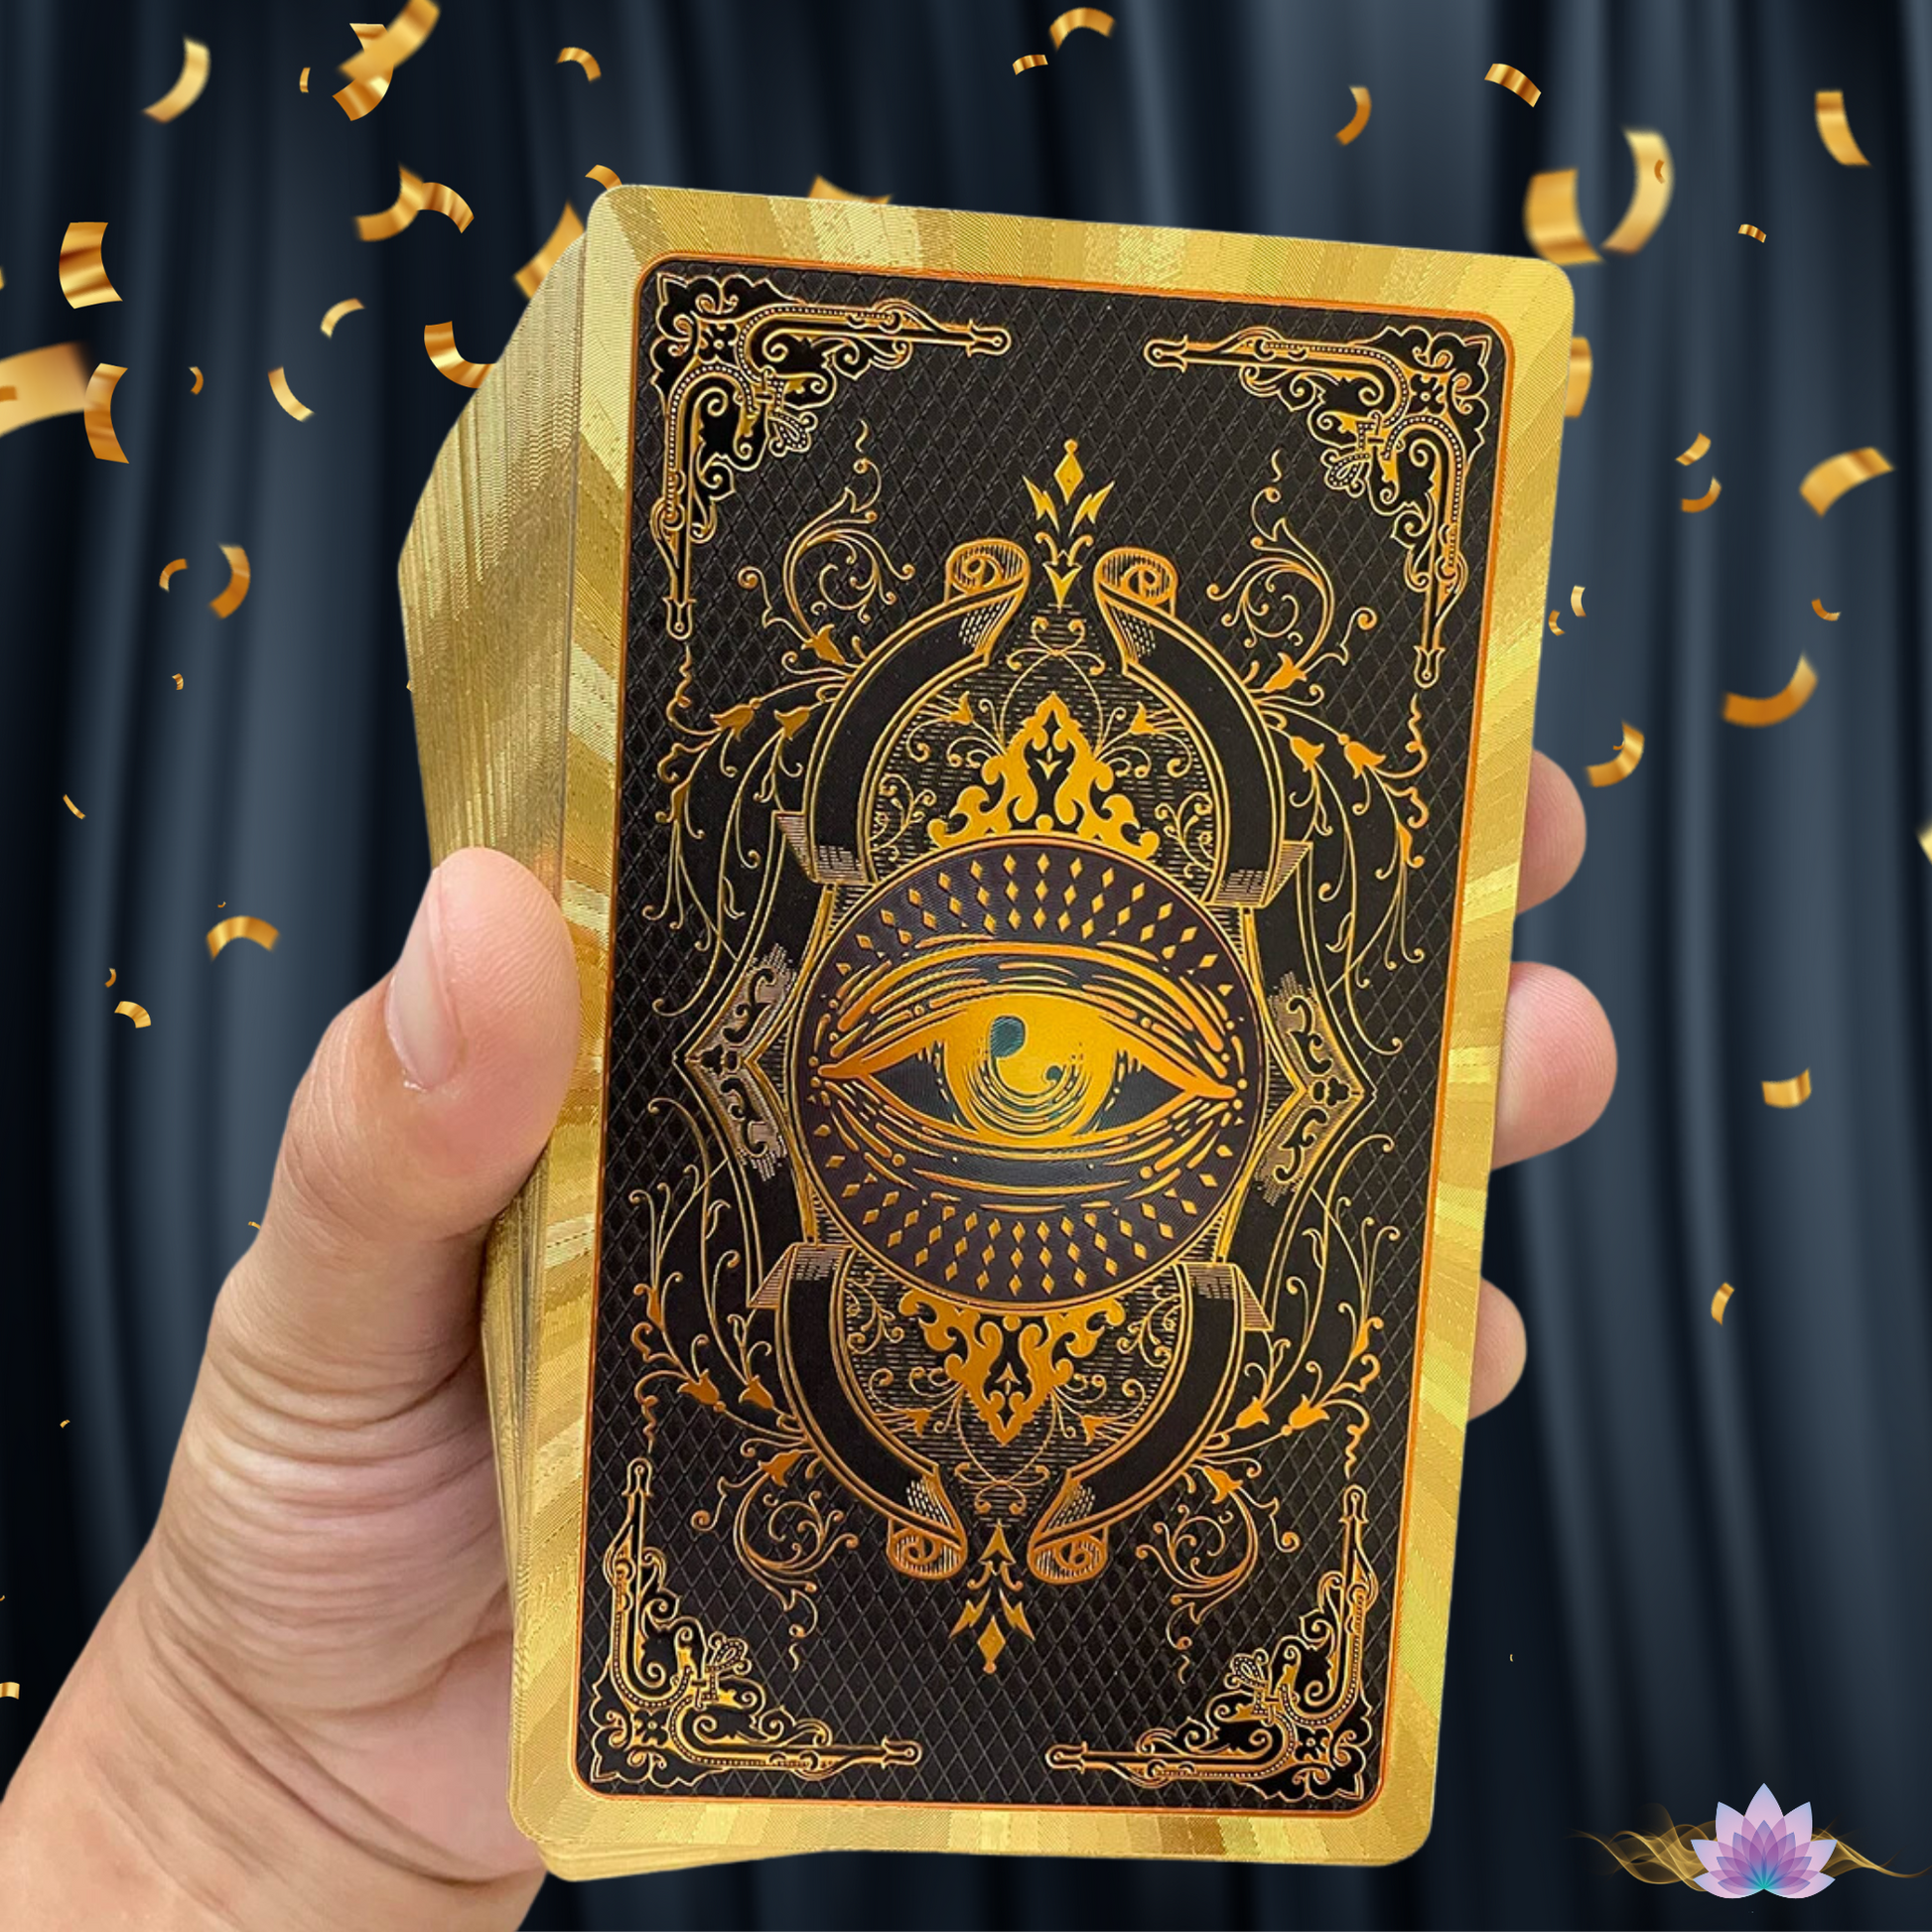 Spanish & English Gold Foil Tarot Deck W/ Guidebook For Beginner Divination Witch • Bilingual Golden Premium Waite Style Cards In Tuck Box • Apollo Tarot Shop